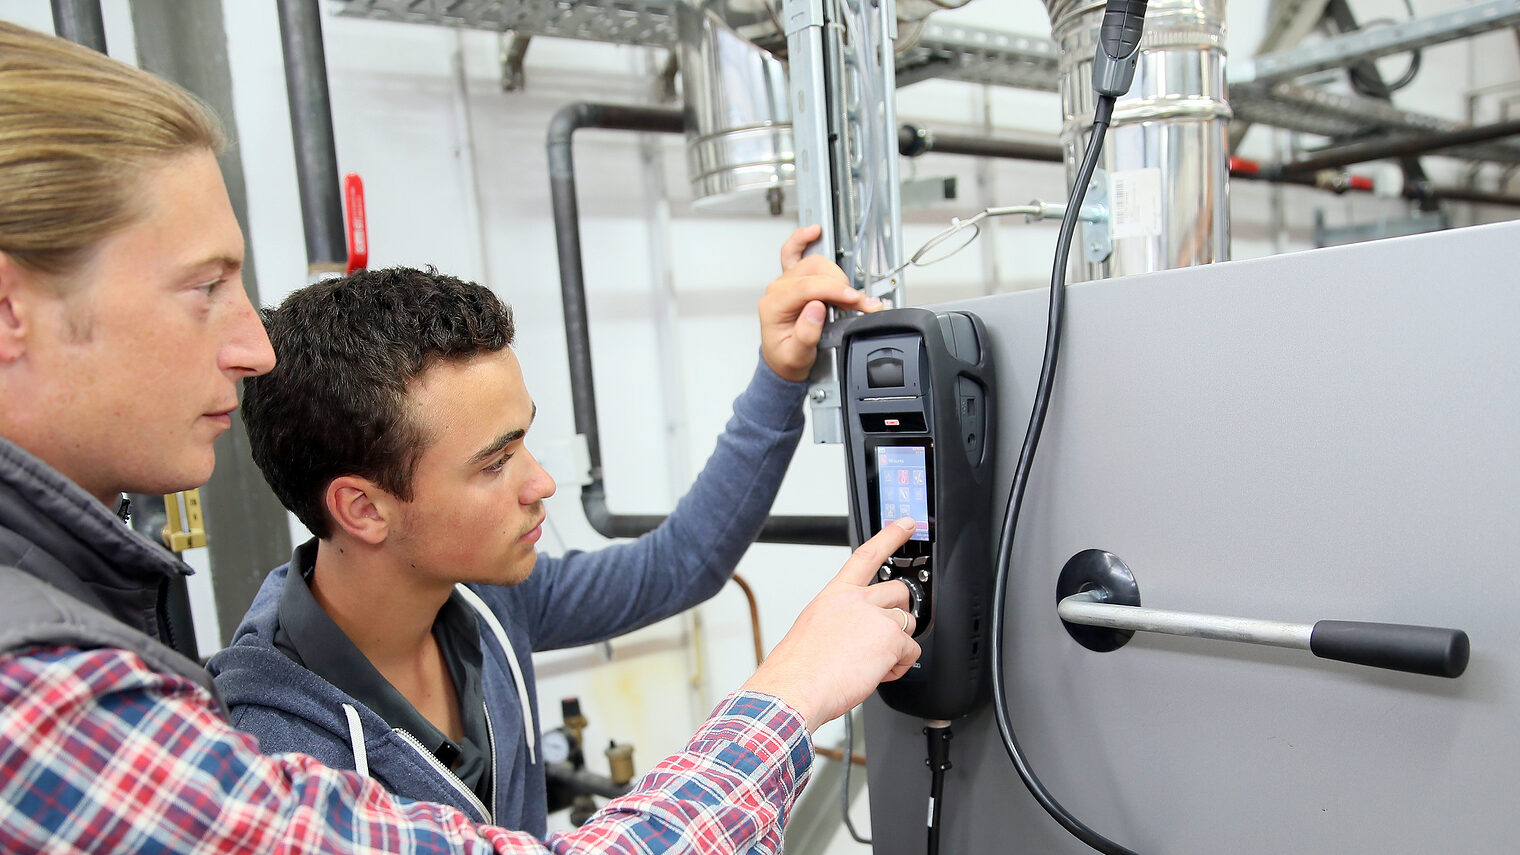 Young man in professional training measuring heat pump temperature Schlagwort(e): electricity, heat pump, intensity, temperature, equipment, measure, measuring, measurement, control, engineer, renewable energy, environmental, training, young man, trainee, apprenticeship, apprentice, student, professional, occupation, adult, trainer, teacher, machinery, school, craftsman, craftsmanship, technician, worker, electronic, plumber, electricity, heat pump, intensity, temperature, equipment, measure, measuring, measurement, control, engineer, renewable energy, environmental, training, young man, trainee, apprenticeship, apprentice, student, professional, occupation, adult, trainer, teacher, machinery, school, craftsman, craftsmanship, technician, worker, electronic, plumber